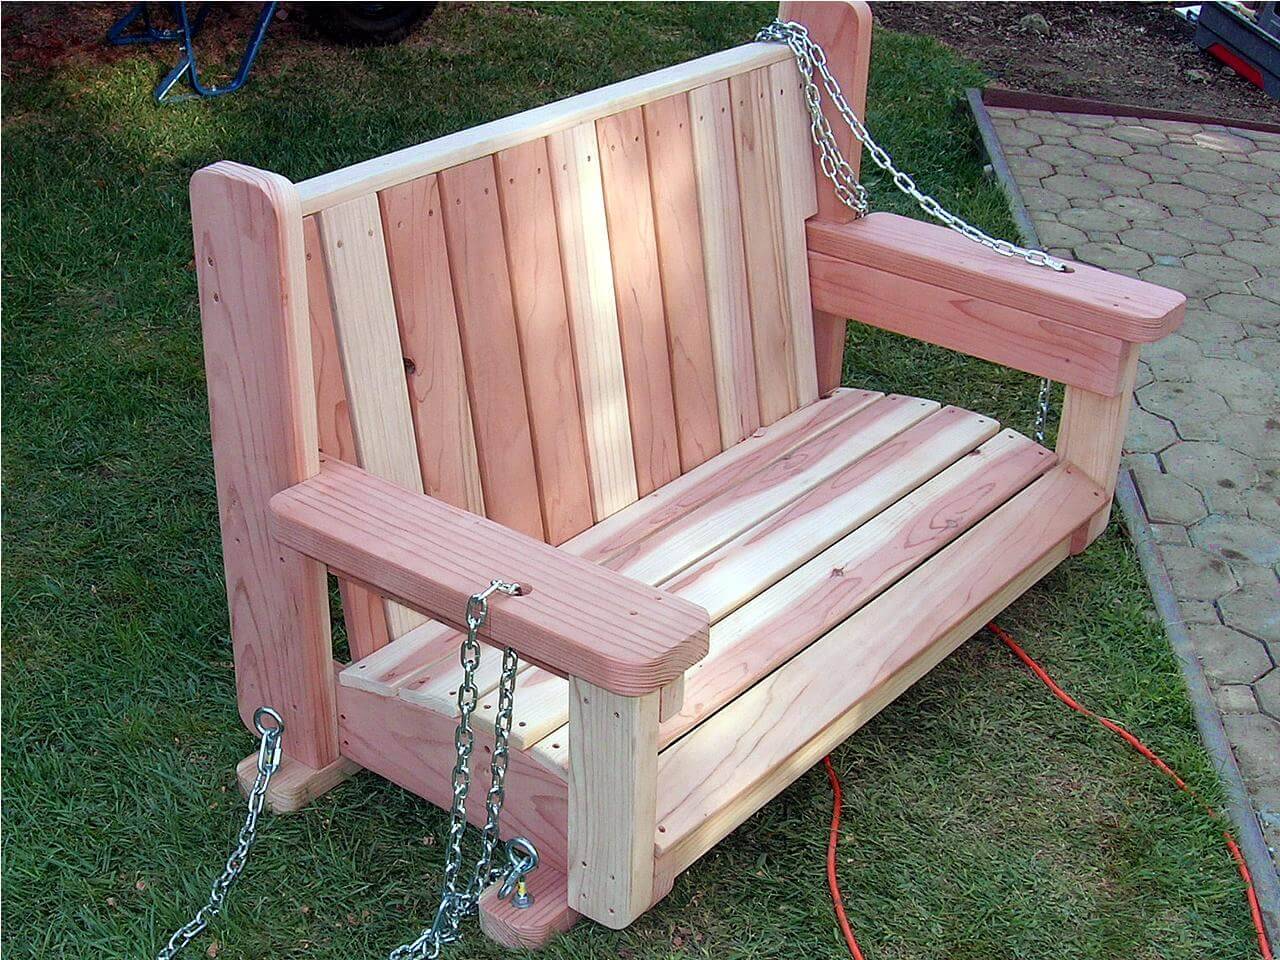 The All American Bed Swing Rustic Porch Swing